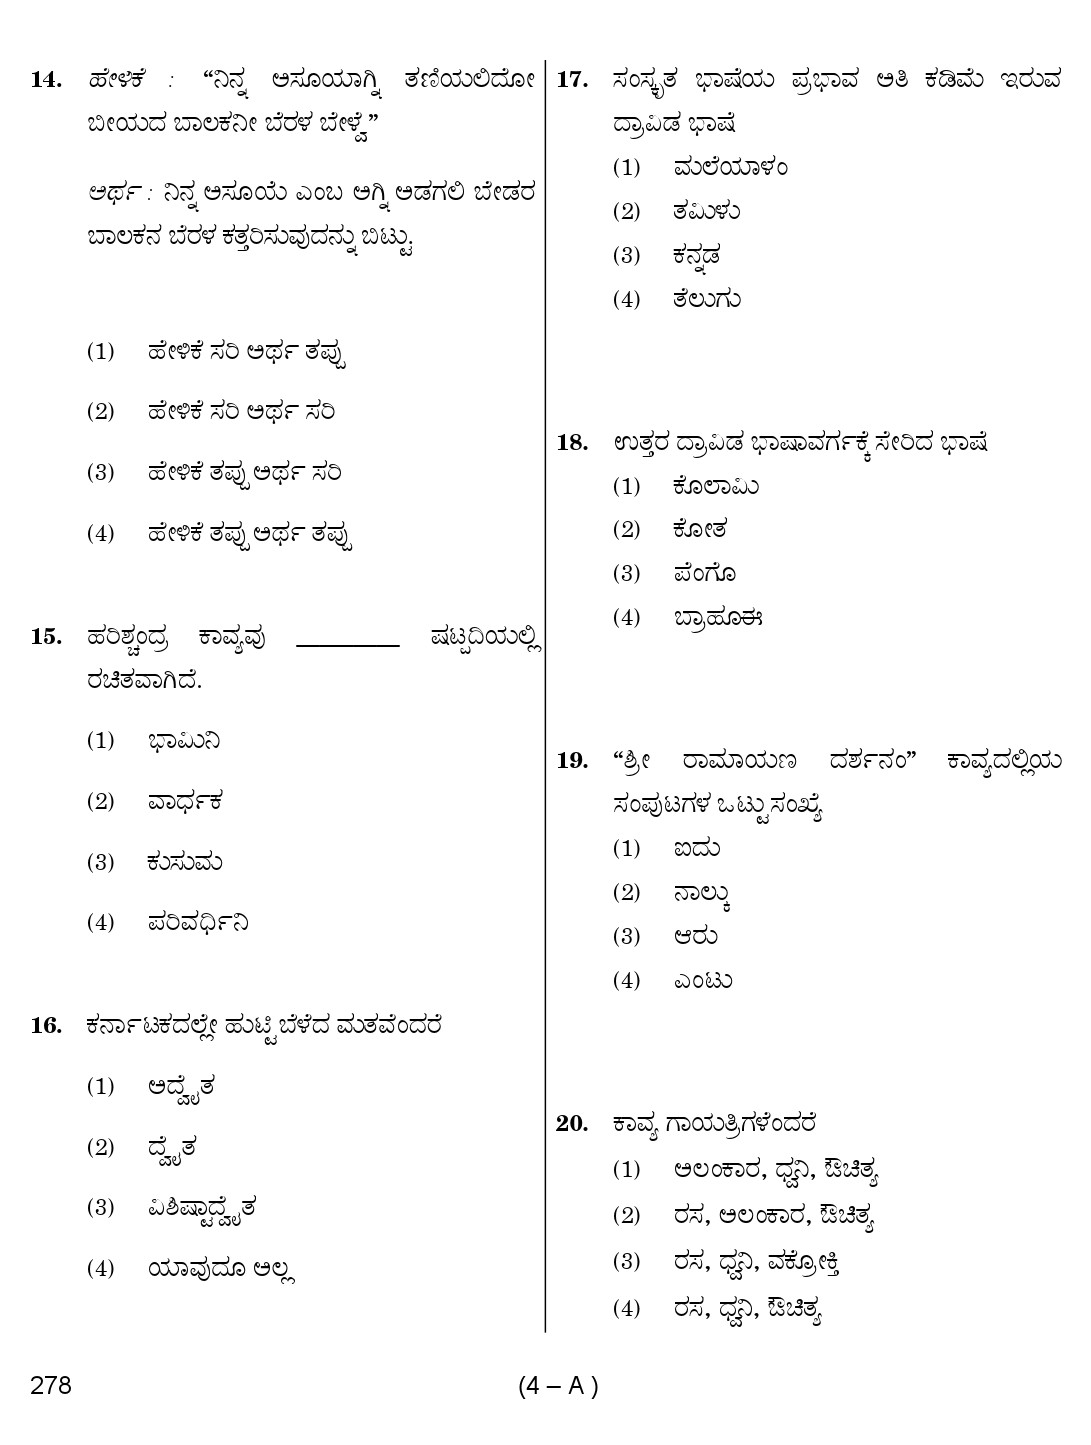 Karnataka PSC First Division Computer Assistants Exam Sample Question Paper 278 4